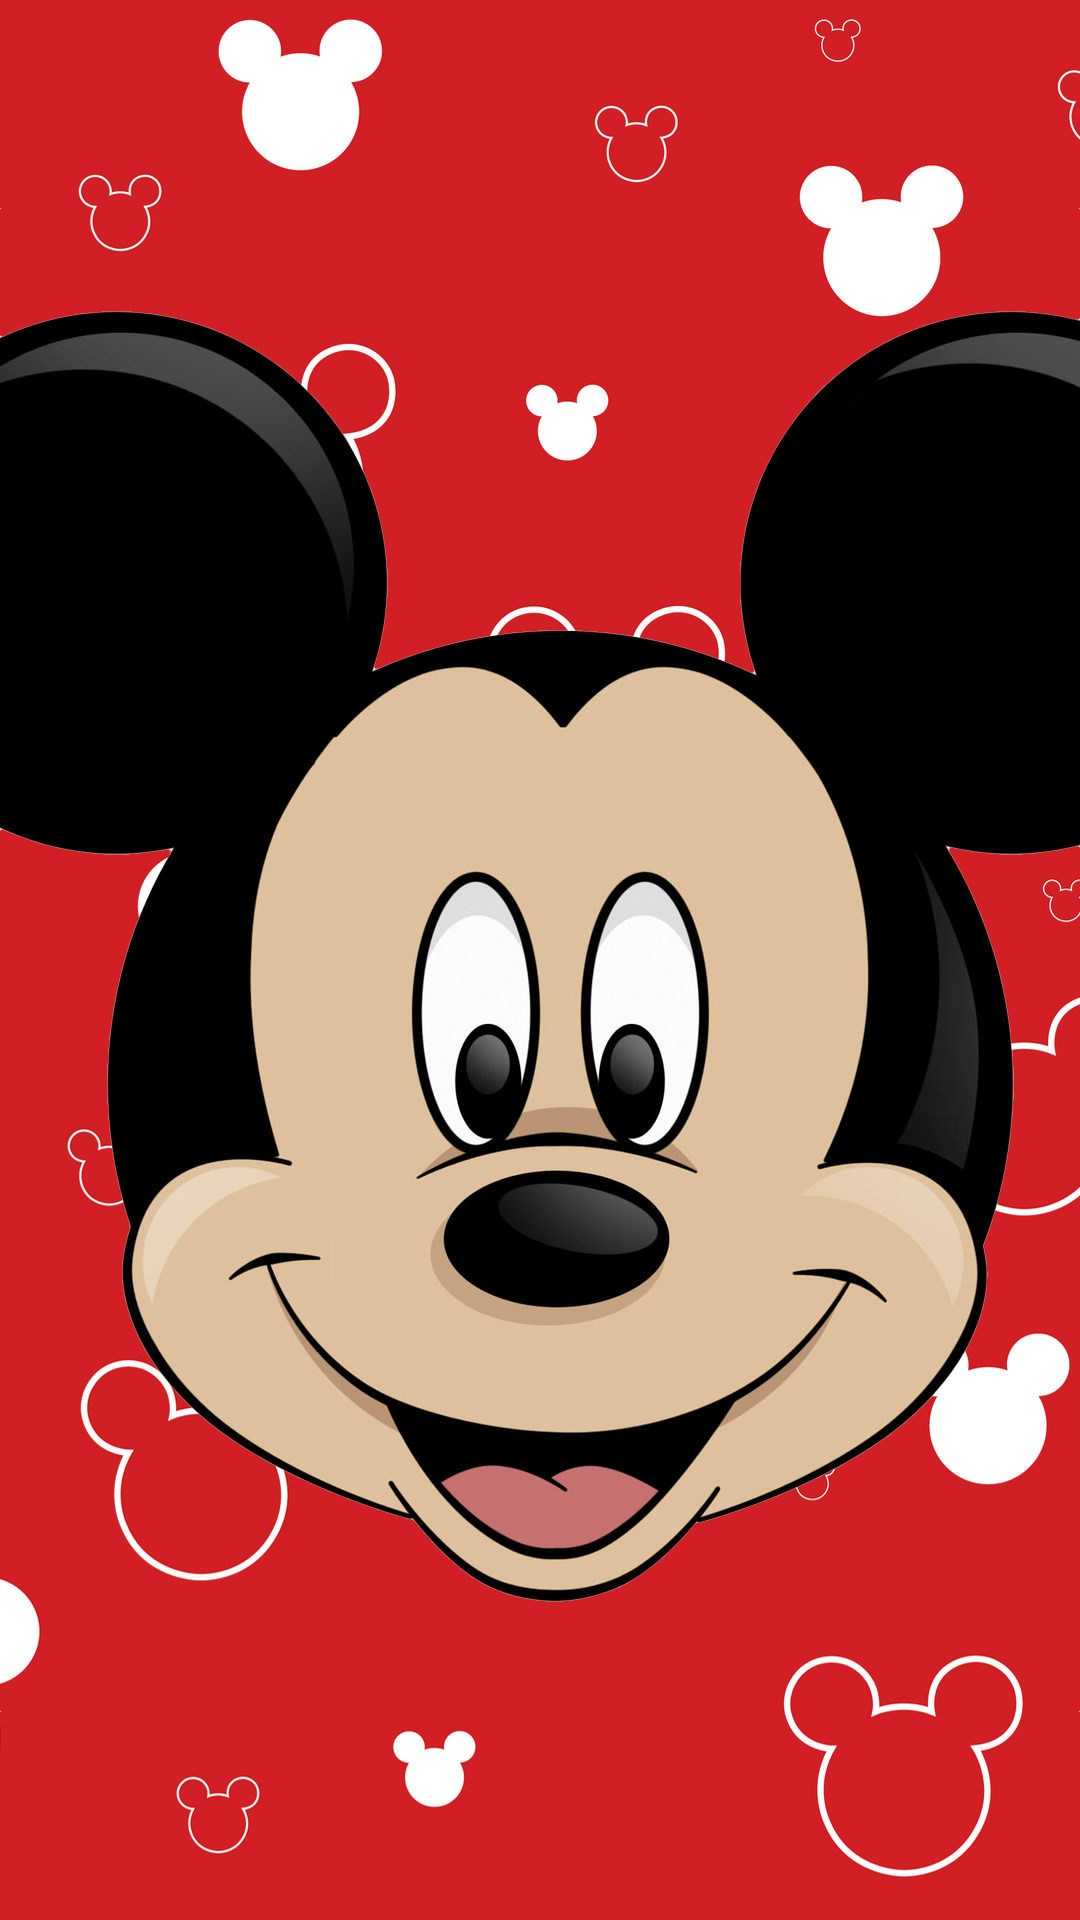 mickey mouse galaxy background